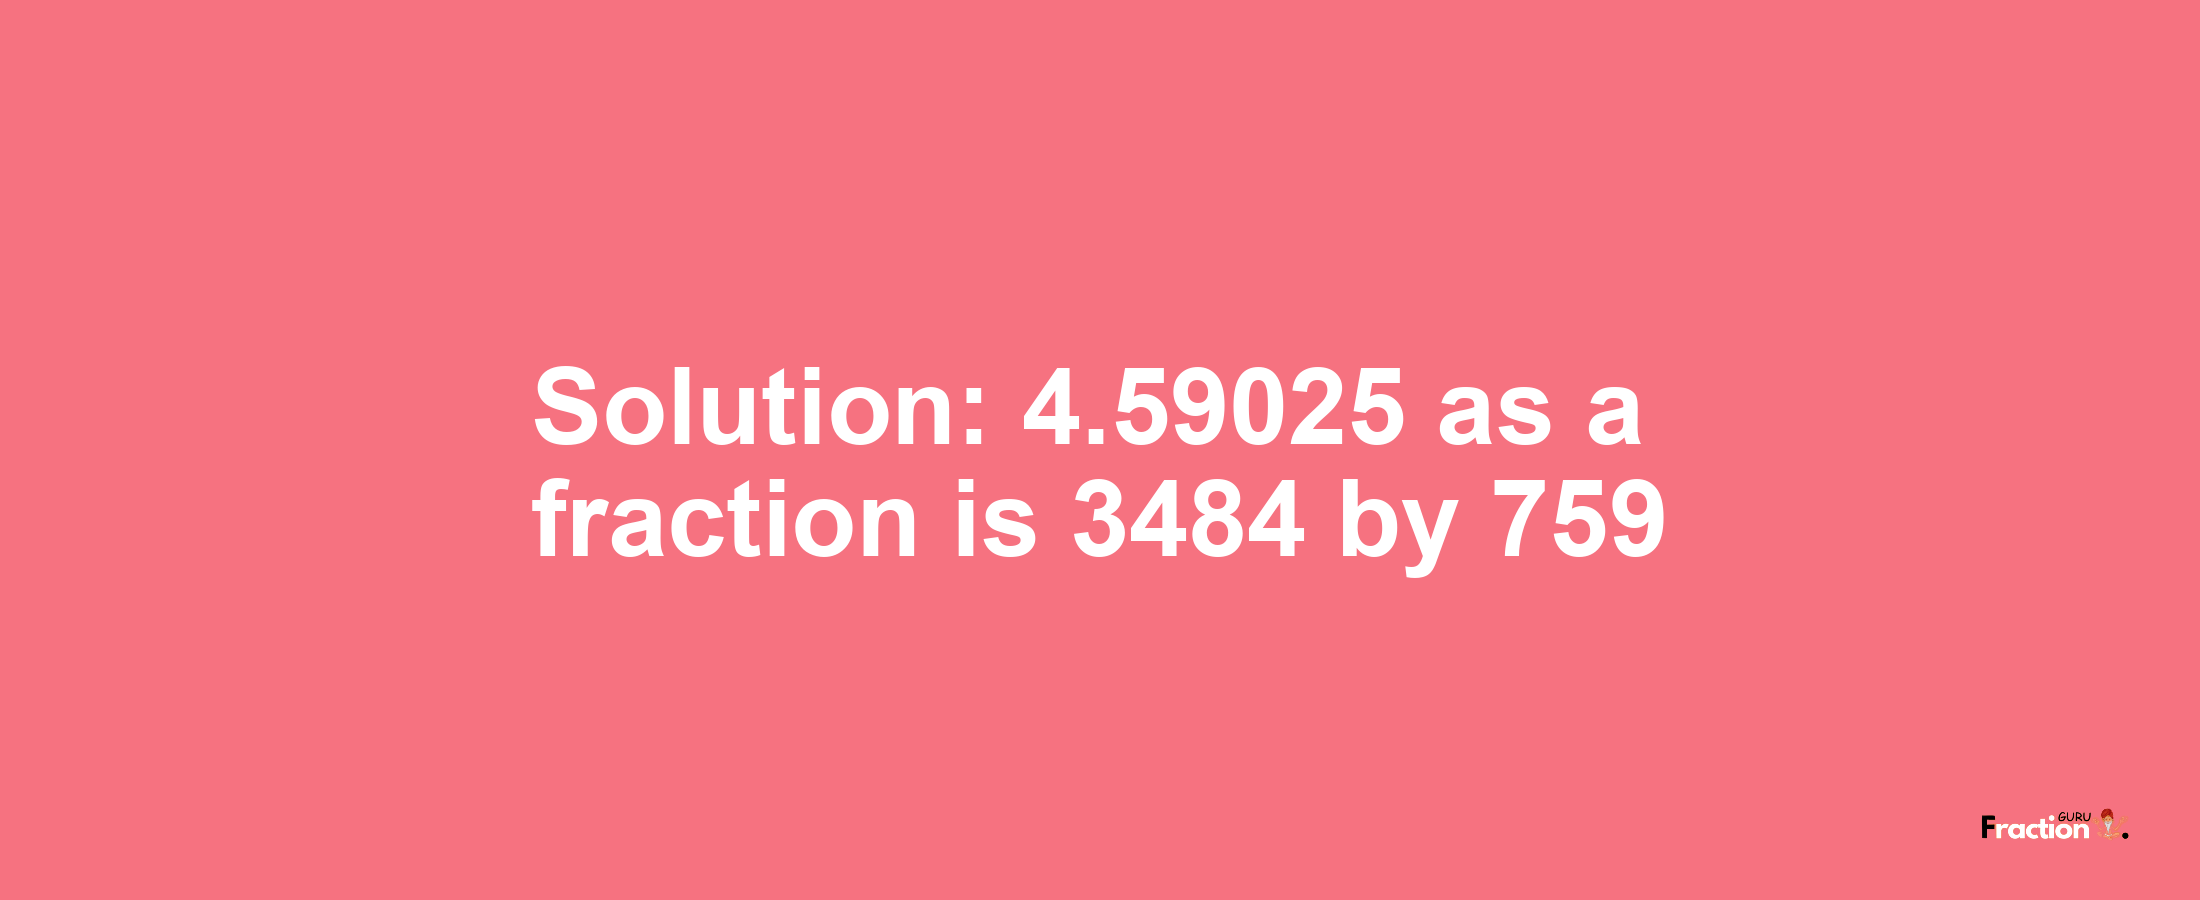 Solution:4.59025 as a fraction is 3484/759